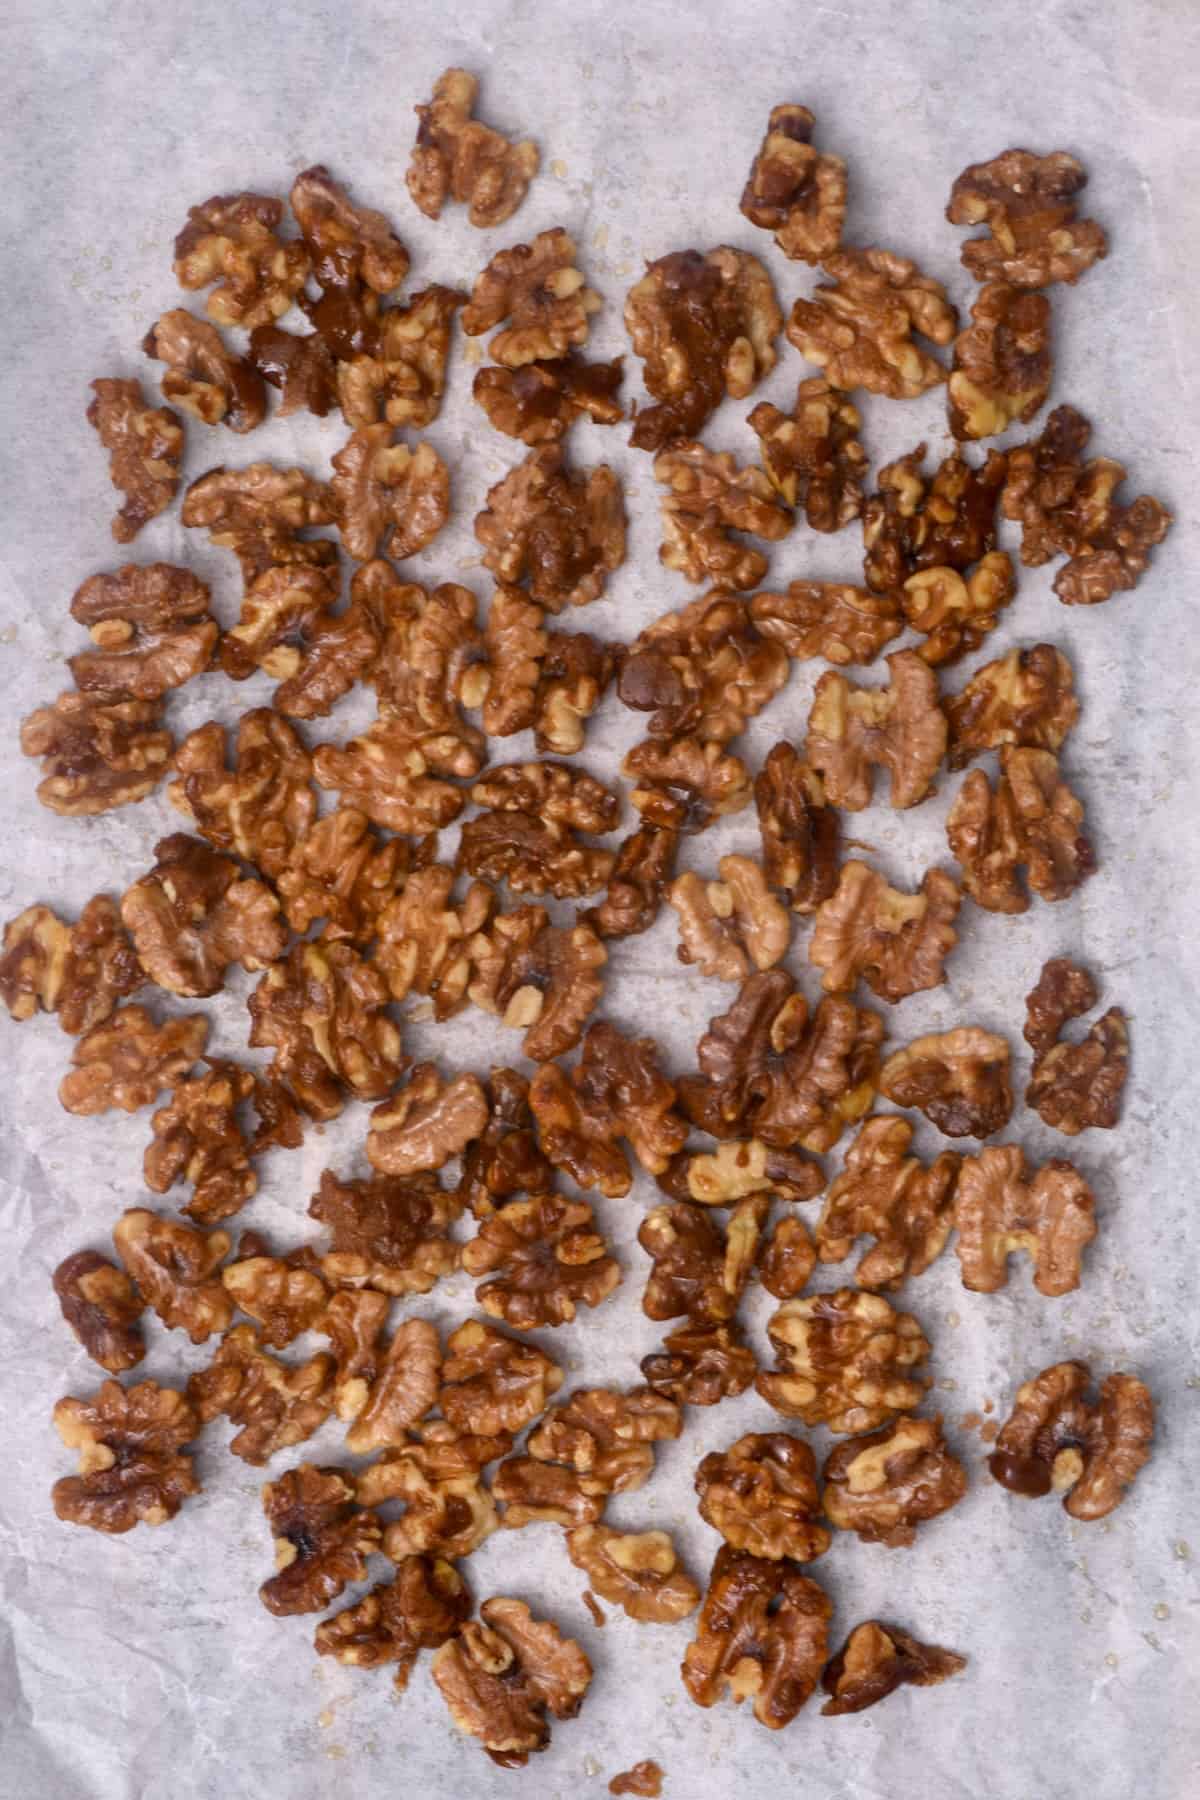 Drying walnuts on parchment paper